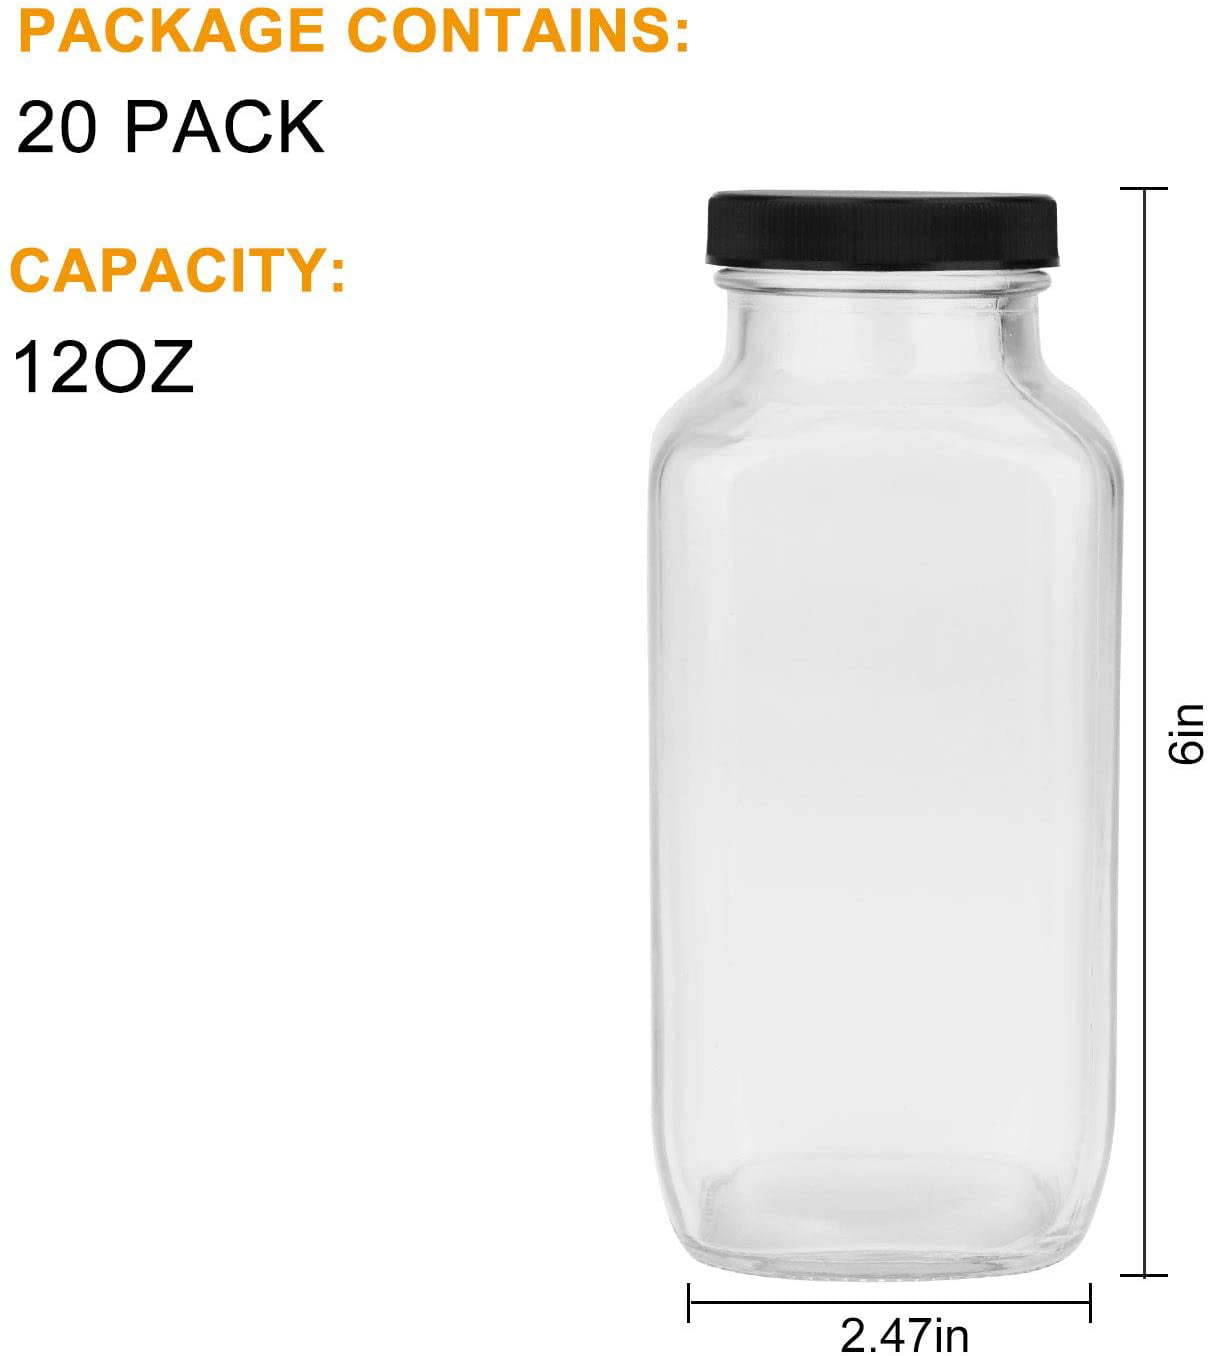 Great for storing Juices Labels and Sponge Brush Included Beverages Milk Kombucha and More Set of 12 Vintage Glass Water Bottles with Lids HINGWAH 16 OZ Glass Drink Bottles